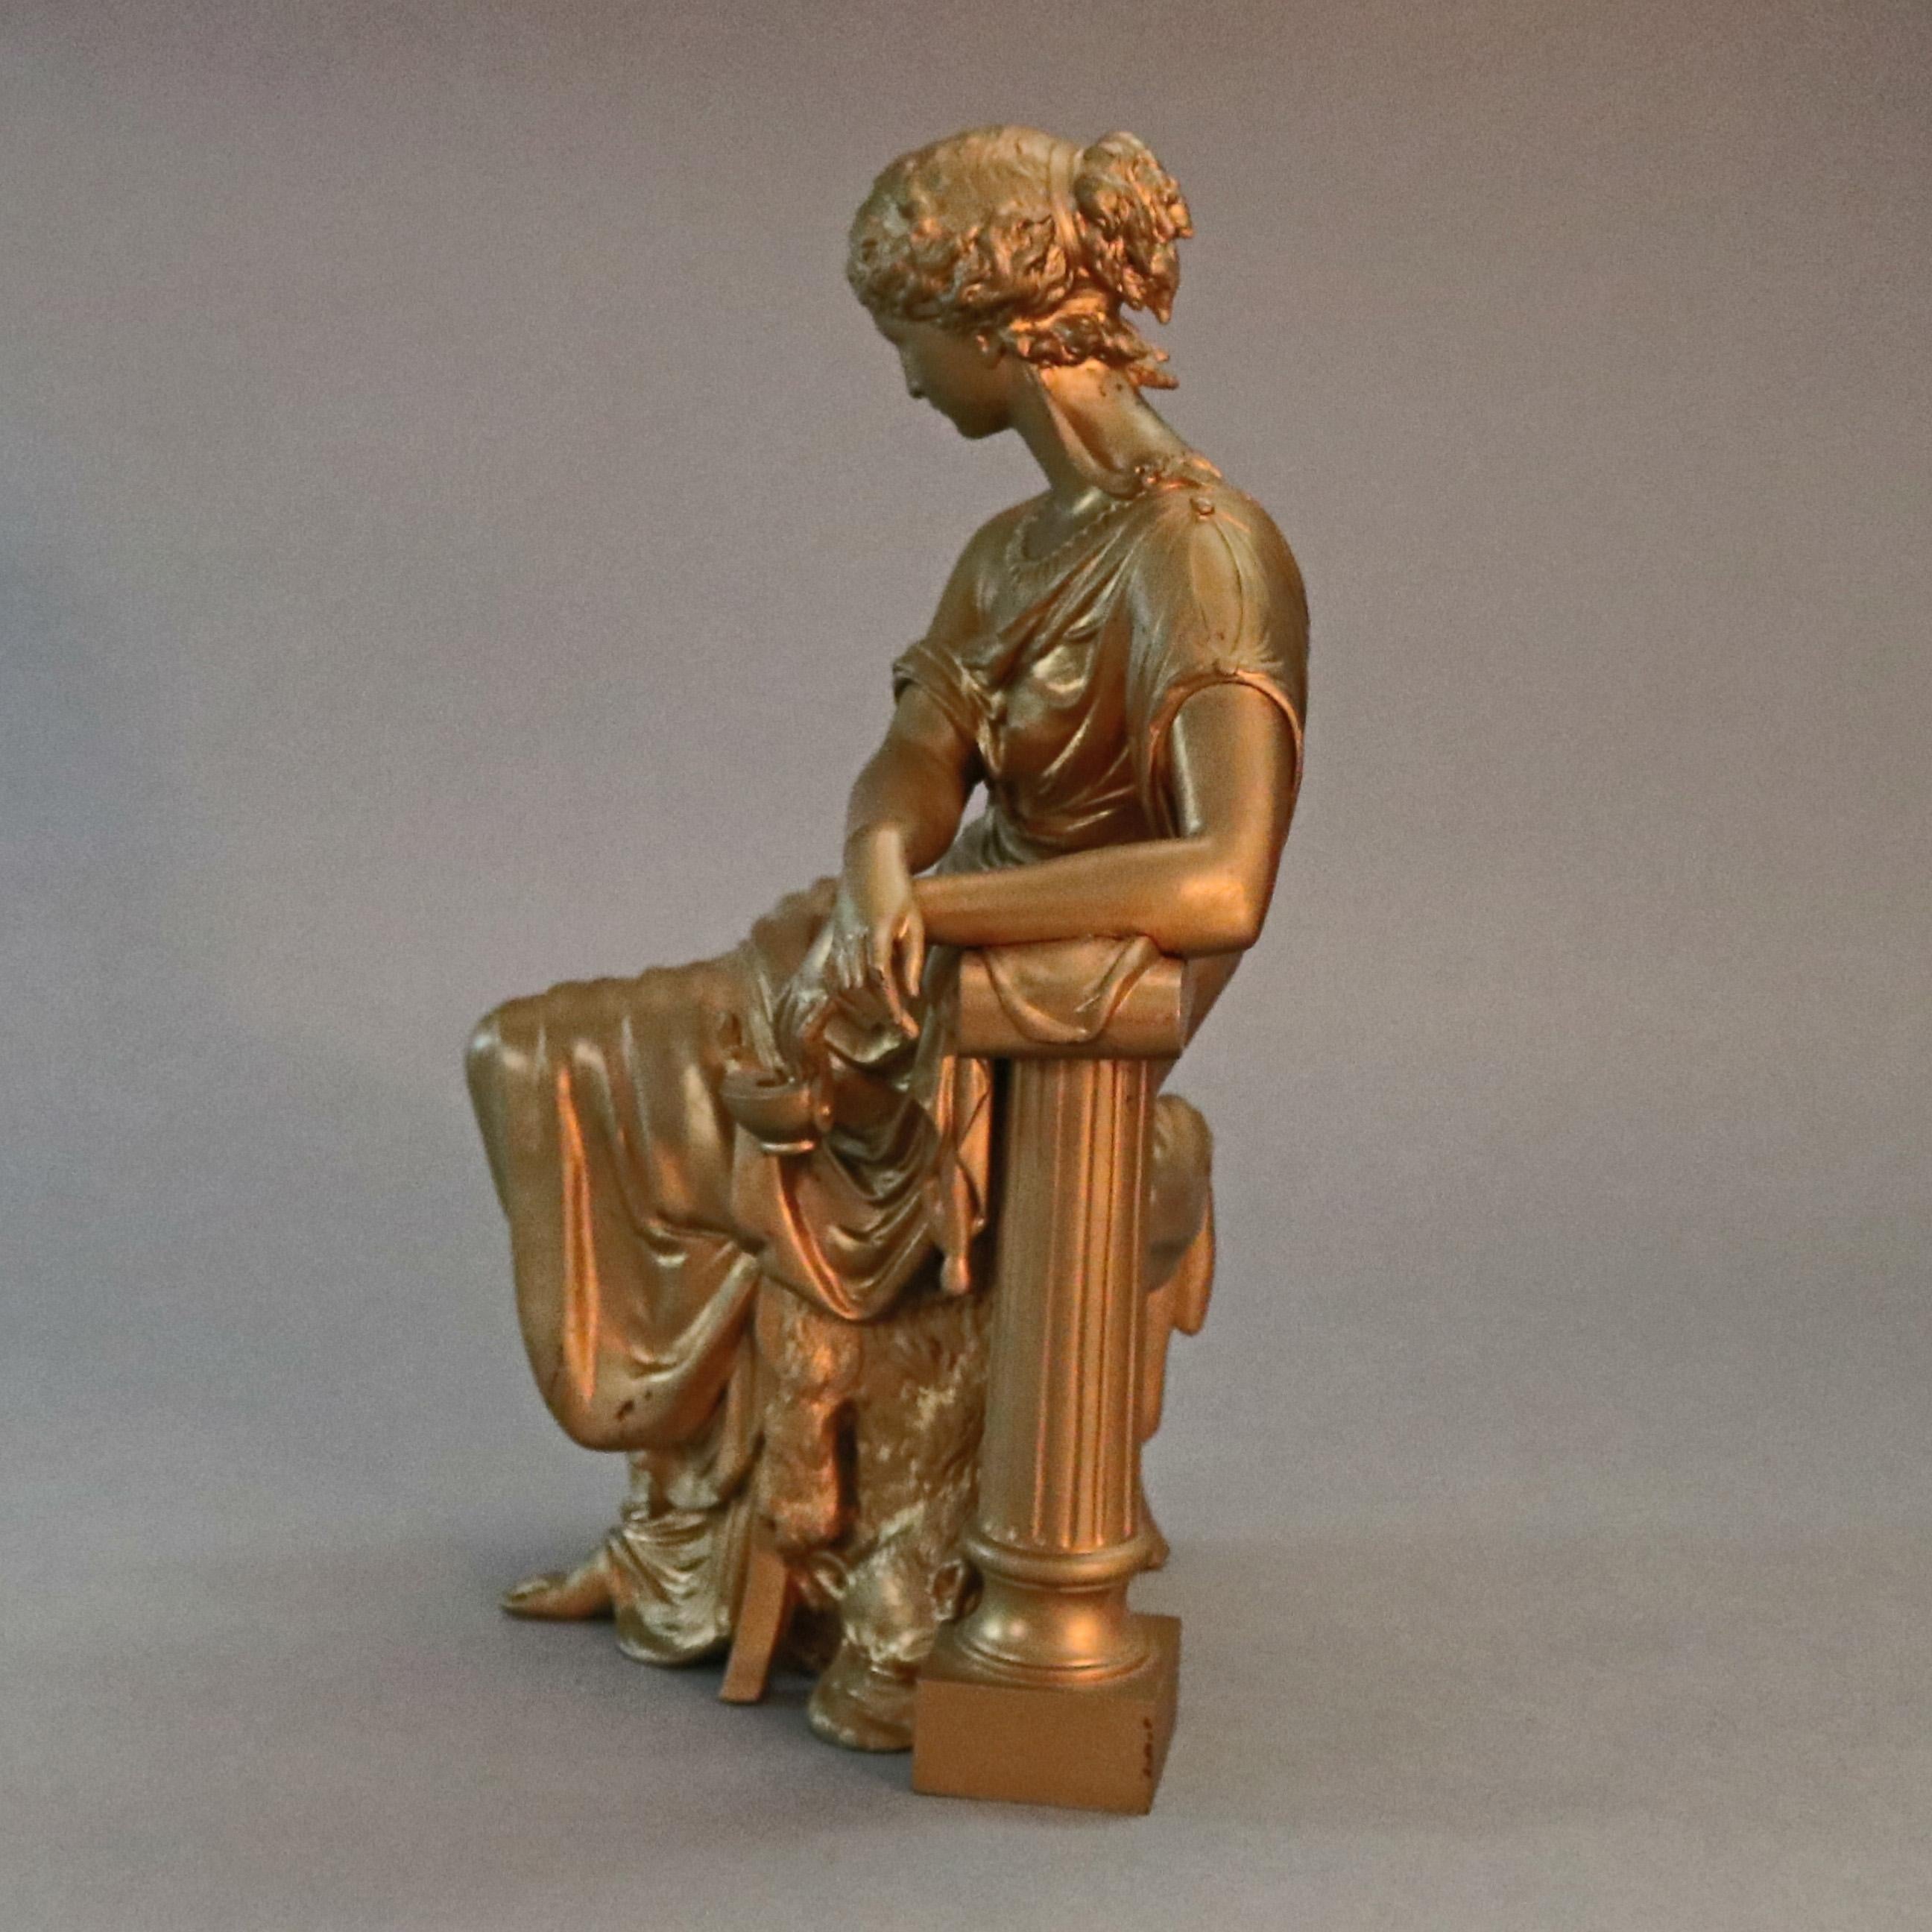 An antique French figural gilt bronze portrait sculpture of seated classical woman leaning on Corinthian column in countryside setting, circa 1890.

Measures: 14.25